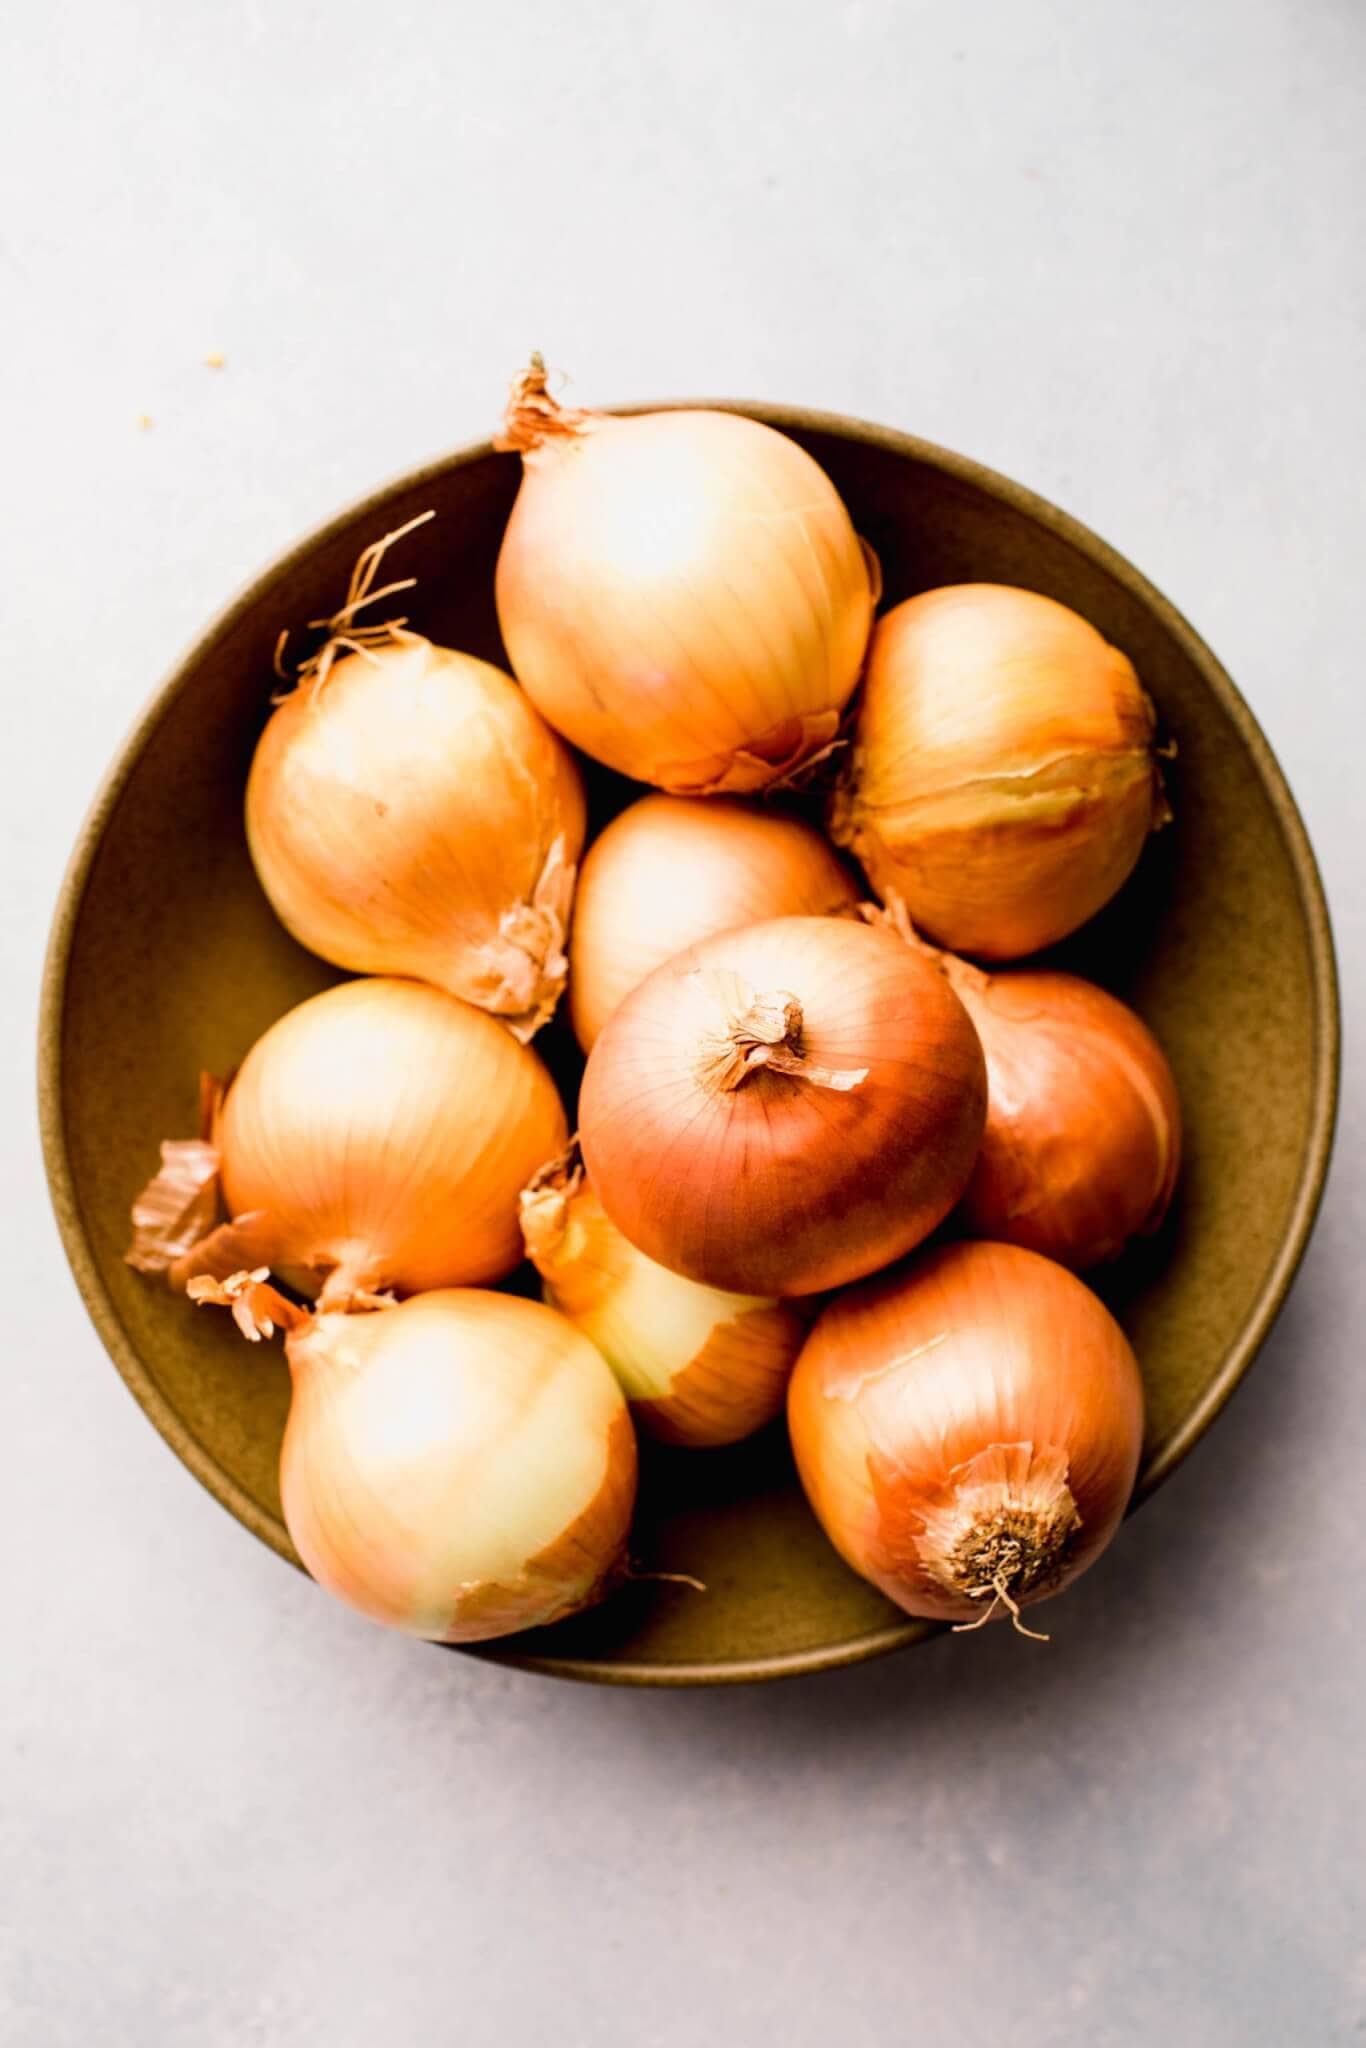 Whole onions in bowl before being sliced.